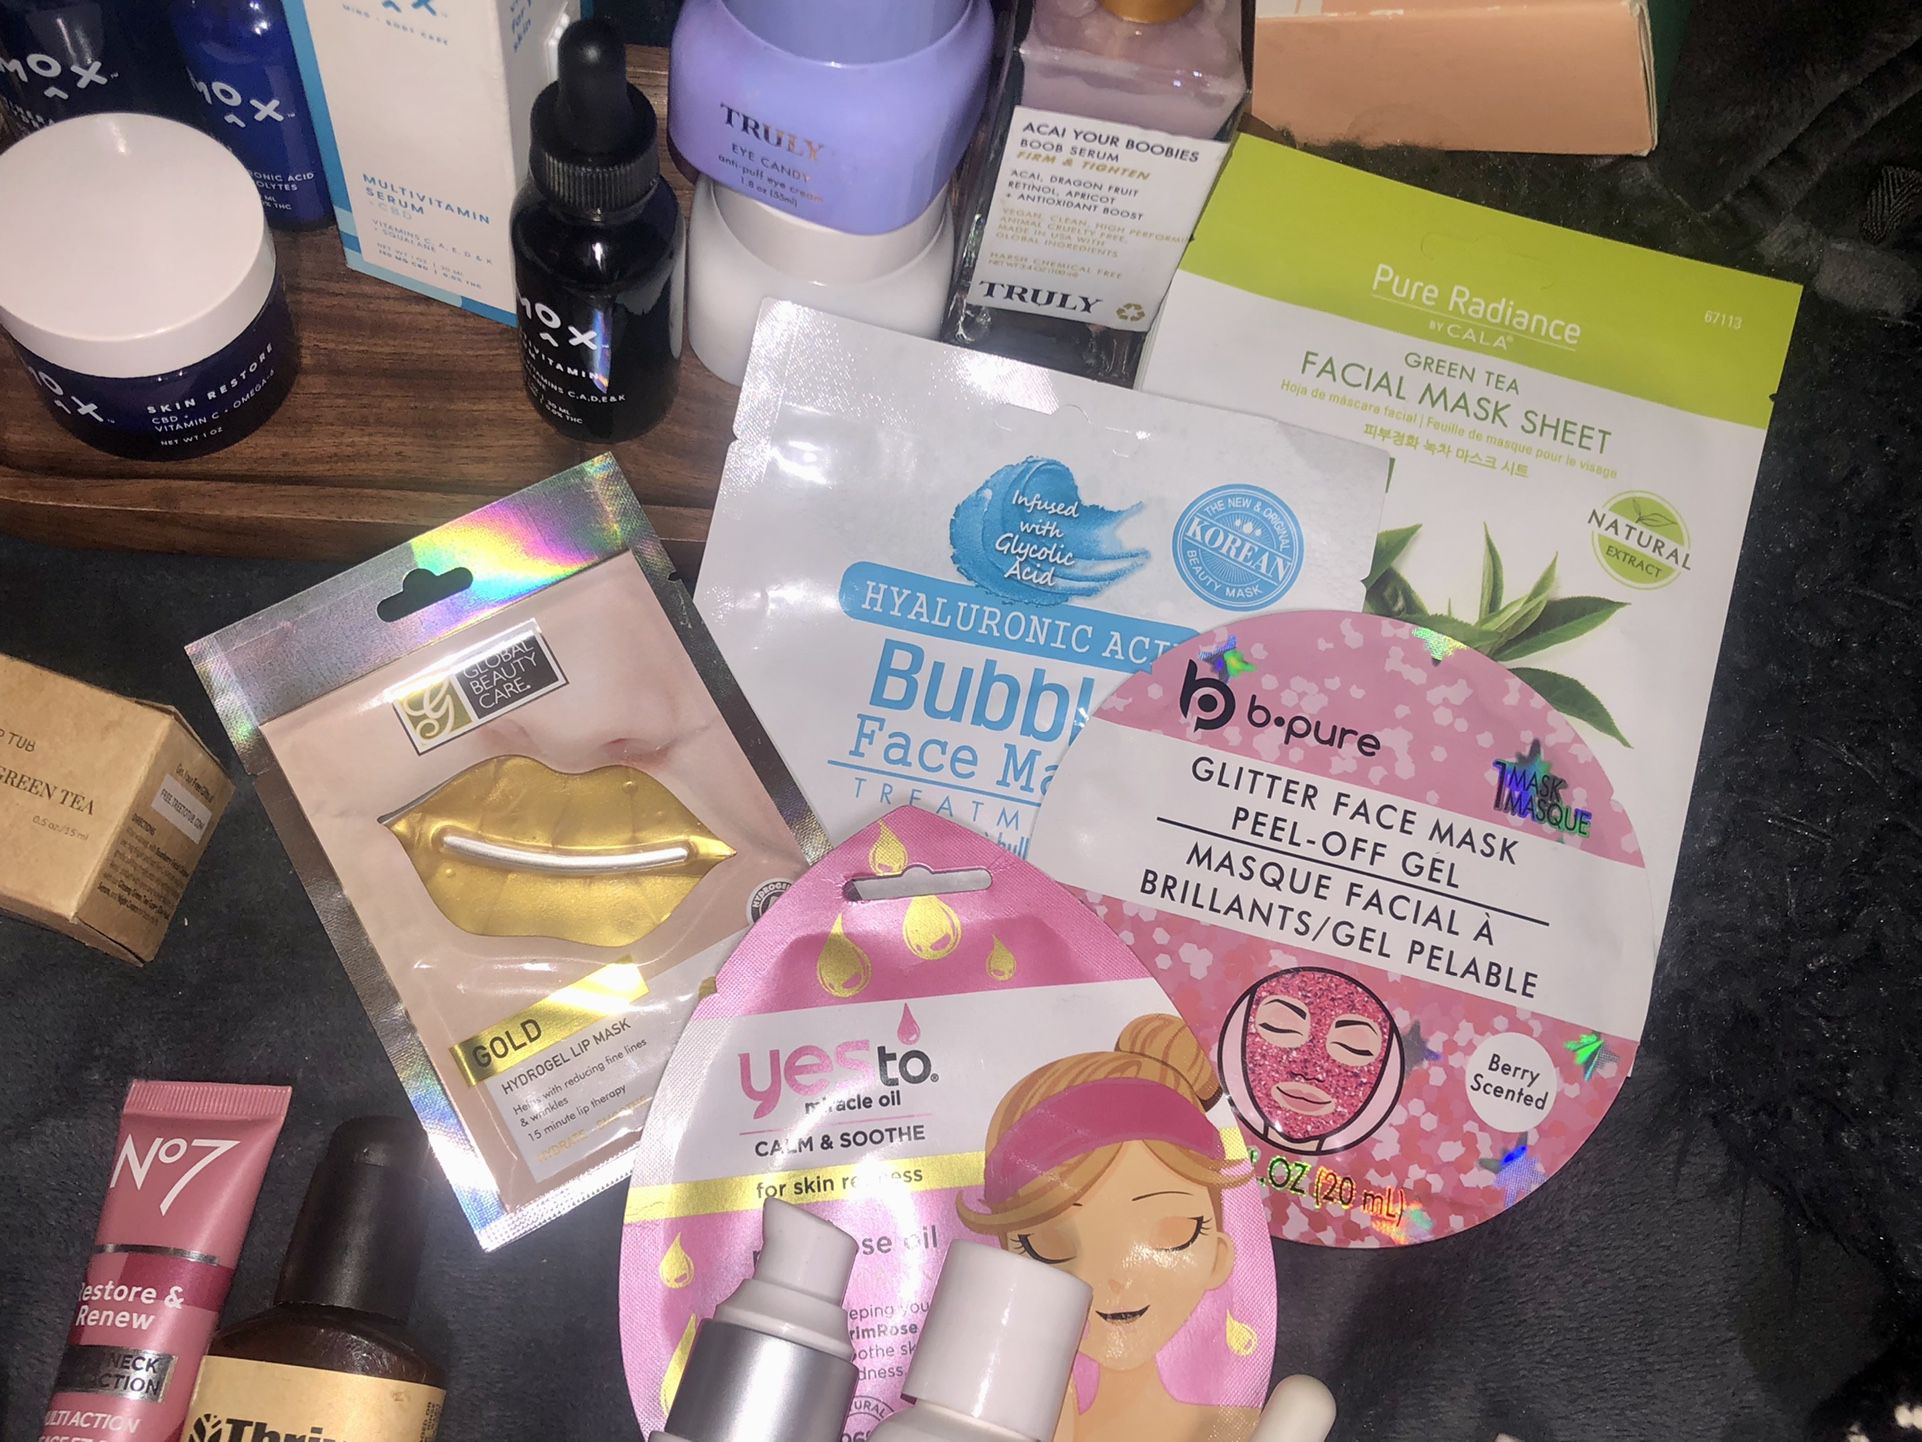 Skin Care Beauty Bundle!! Only $60!! Brand New Everything!! Incredible Deal! Don’t Pass This Up! 